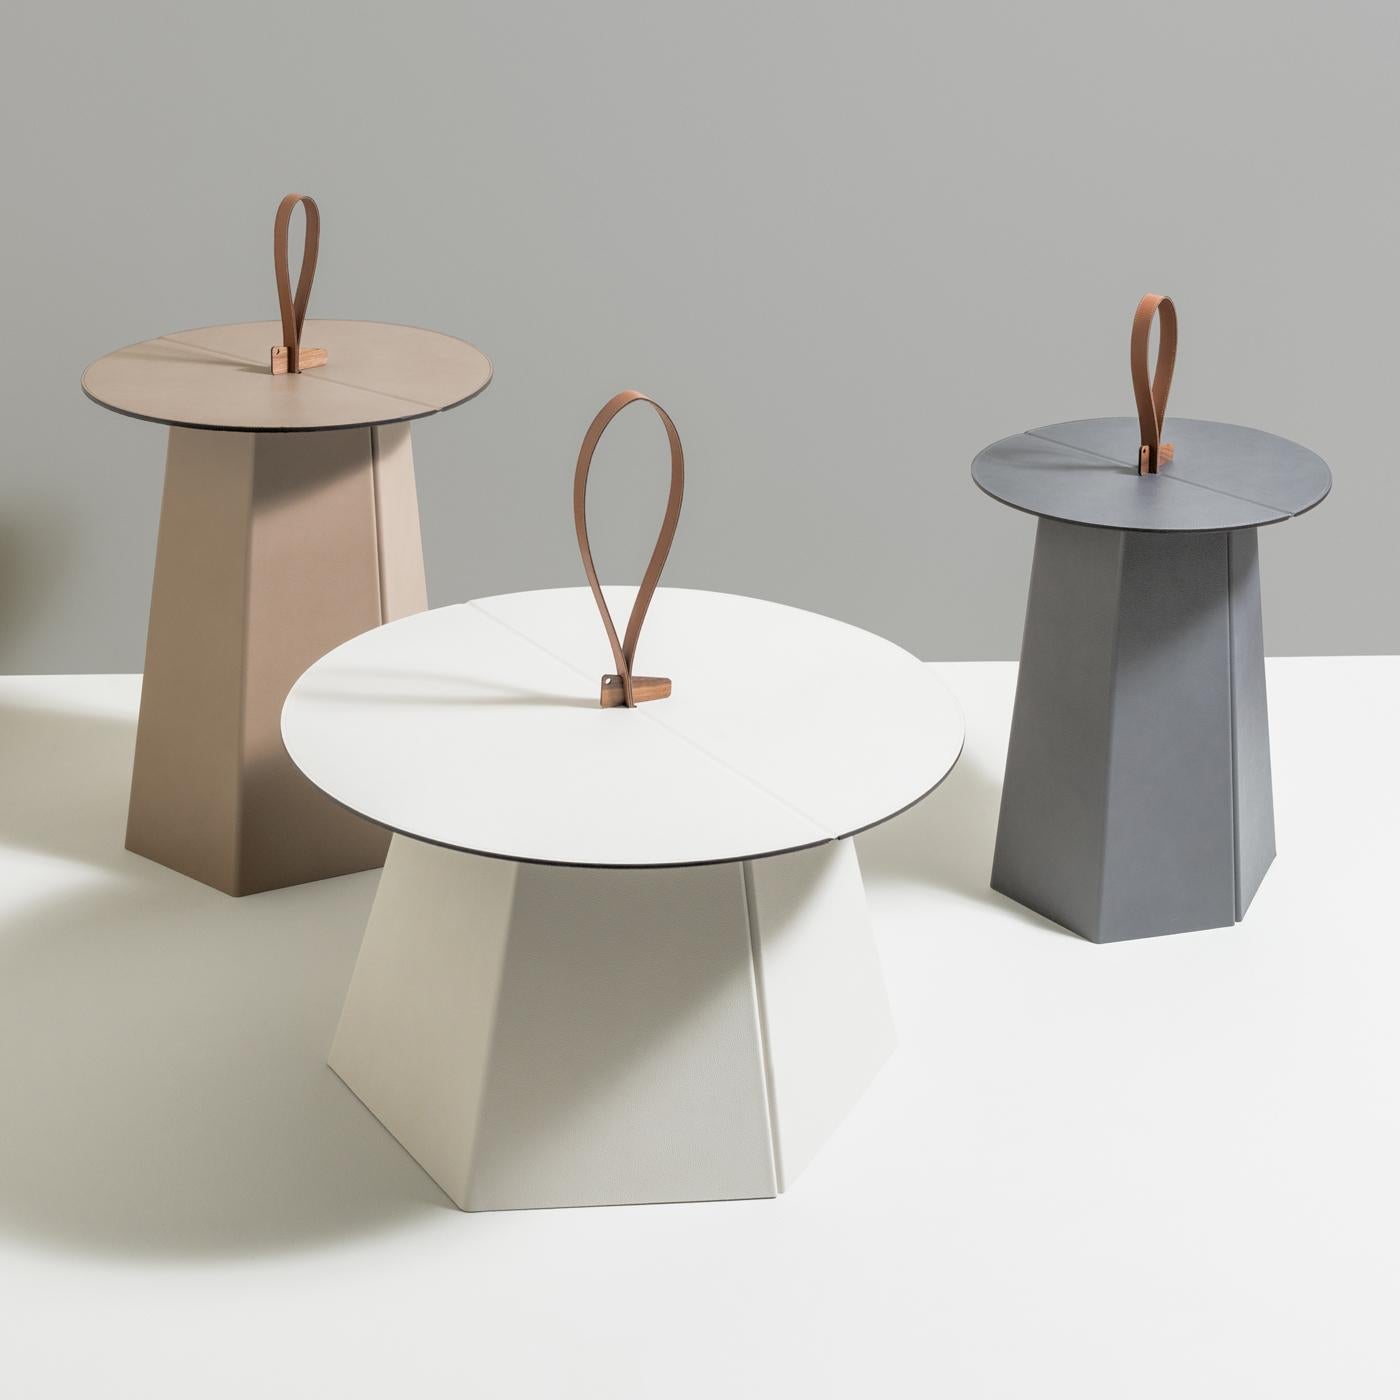 Functionality meets style in this captivating side table defined by sculptural lines, luxurious material, and an easy-to-use foldable design. Entirely handcrafted of grainy leather, this must-have accessory has a hexagonal pillar base and a round